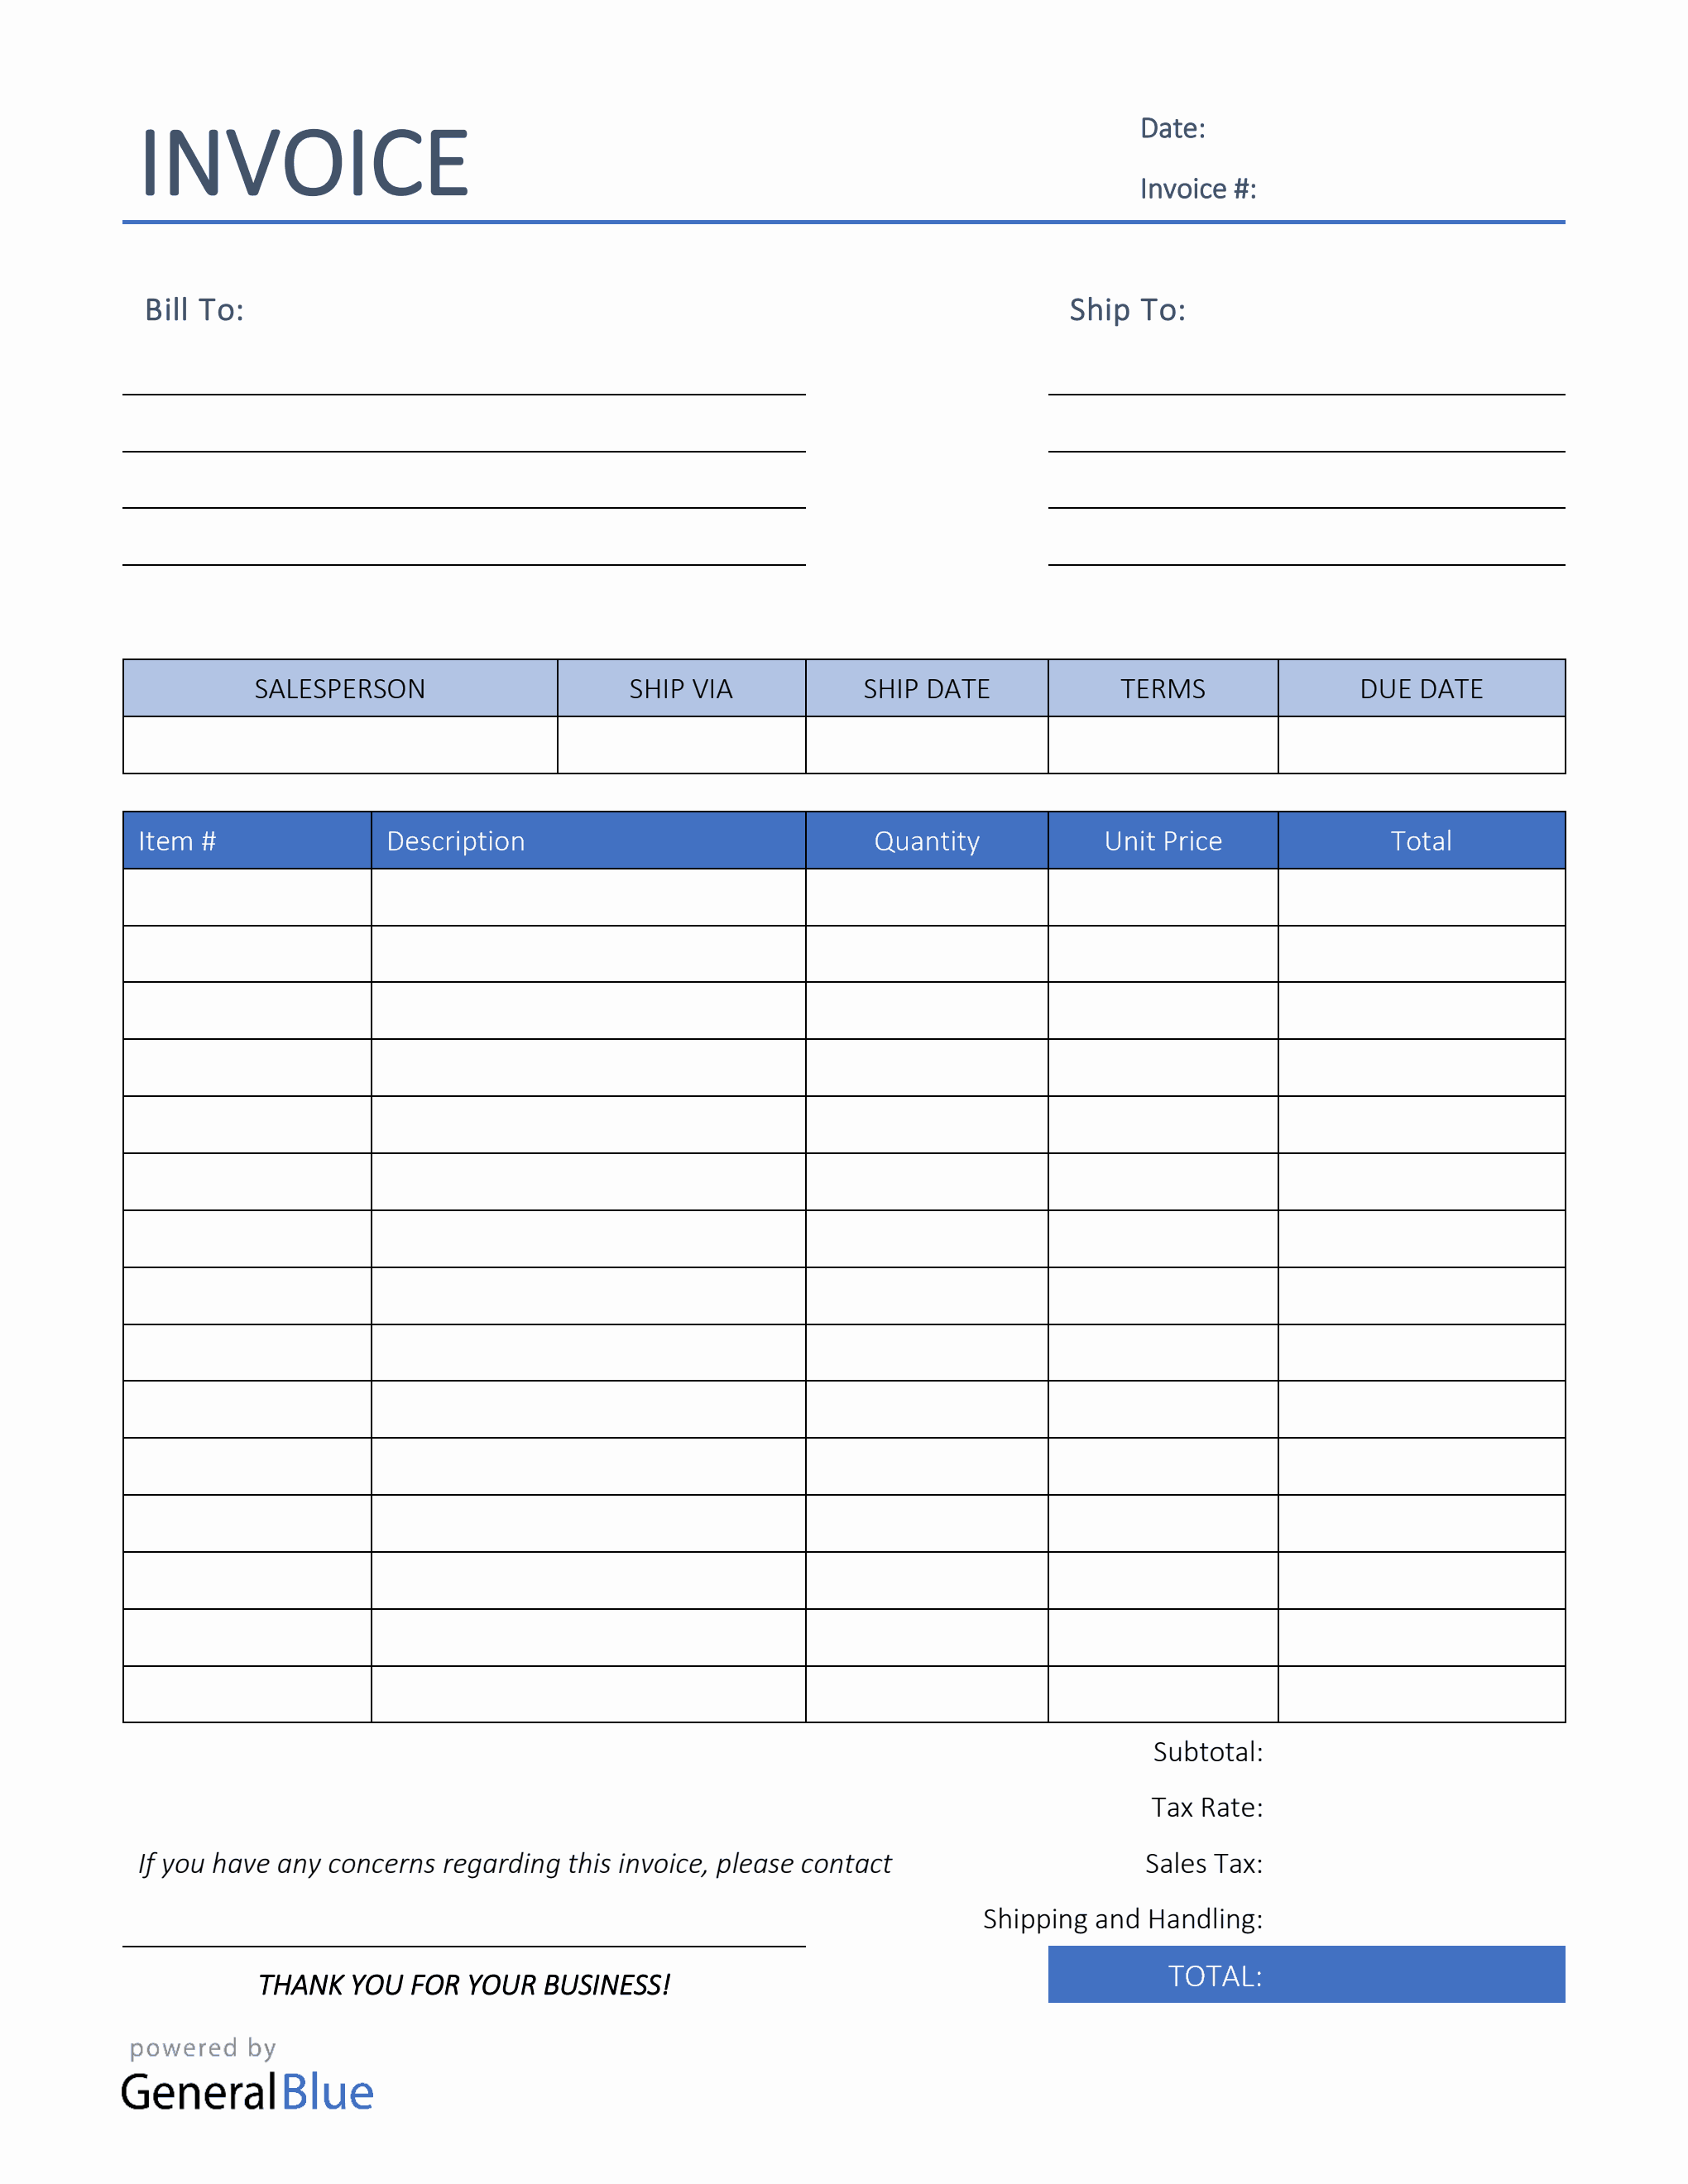 sales invoice template in pdf colorful